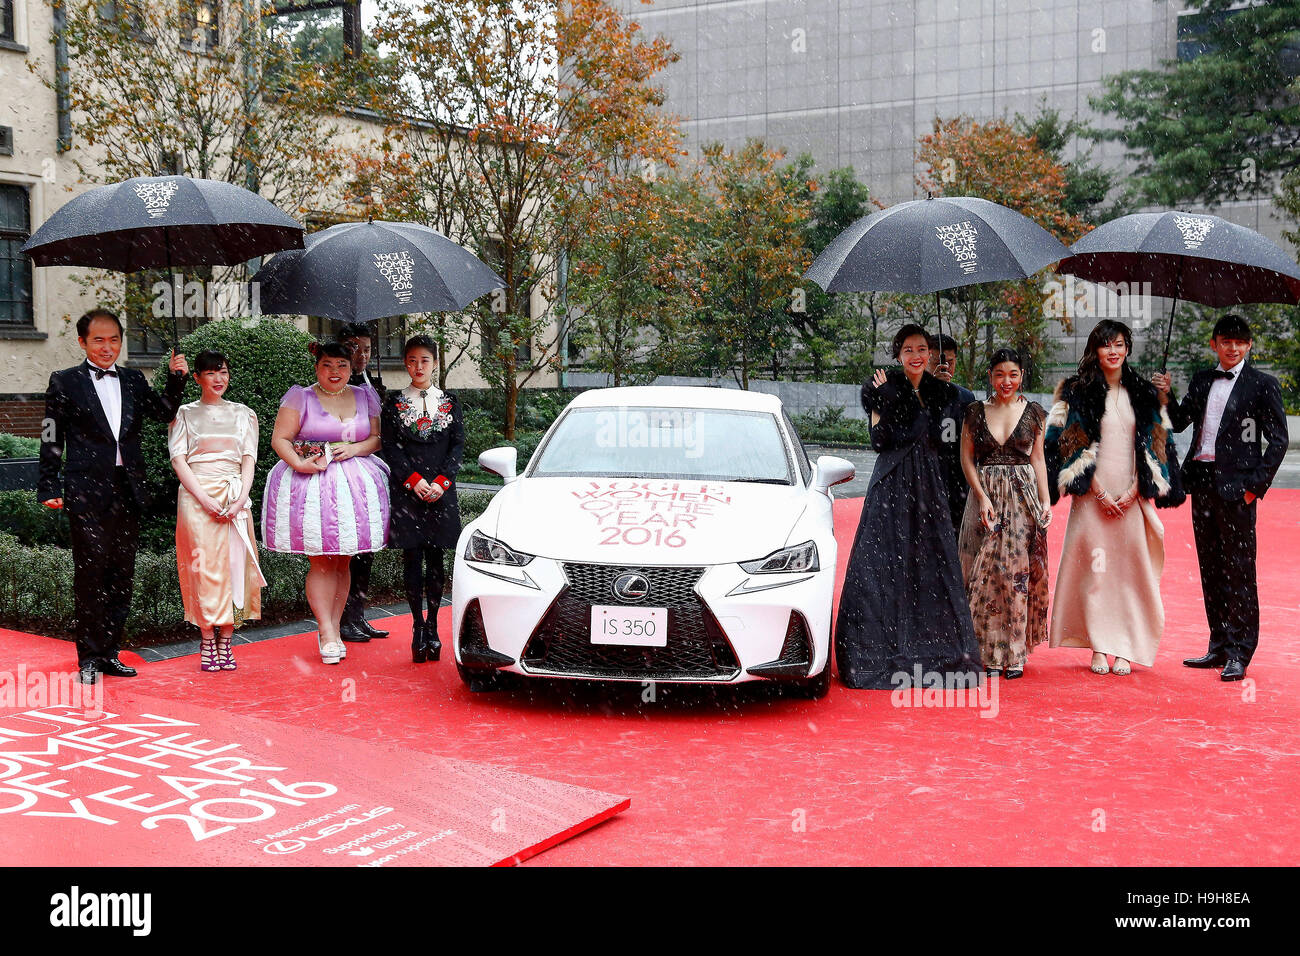 (Second from Left) Novelist Sayaka Murata, actor Naomi Watanabe, singer Mitsuki Takahata, actor Yoshino Kimura, actor Sakura Ando and Rio Olympic 200-meter breaststroke champion Rie Kaneto pose for the cameras during the red carpet for the Vogue Japan Women of the Year 2016 Awards on November 24, 2016, Tokyo, Japan. Every year the fashion magazine awards successful women from various disciplines. This year Tokyo's first female Governor Yuriko Koike sent a video message in gratitude for her inclusion on the awards list. © Rodrigo Reyes Marin/AFLO/Alamy Live News Stock Photo